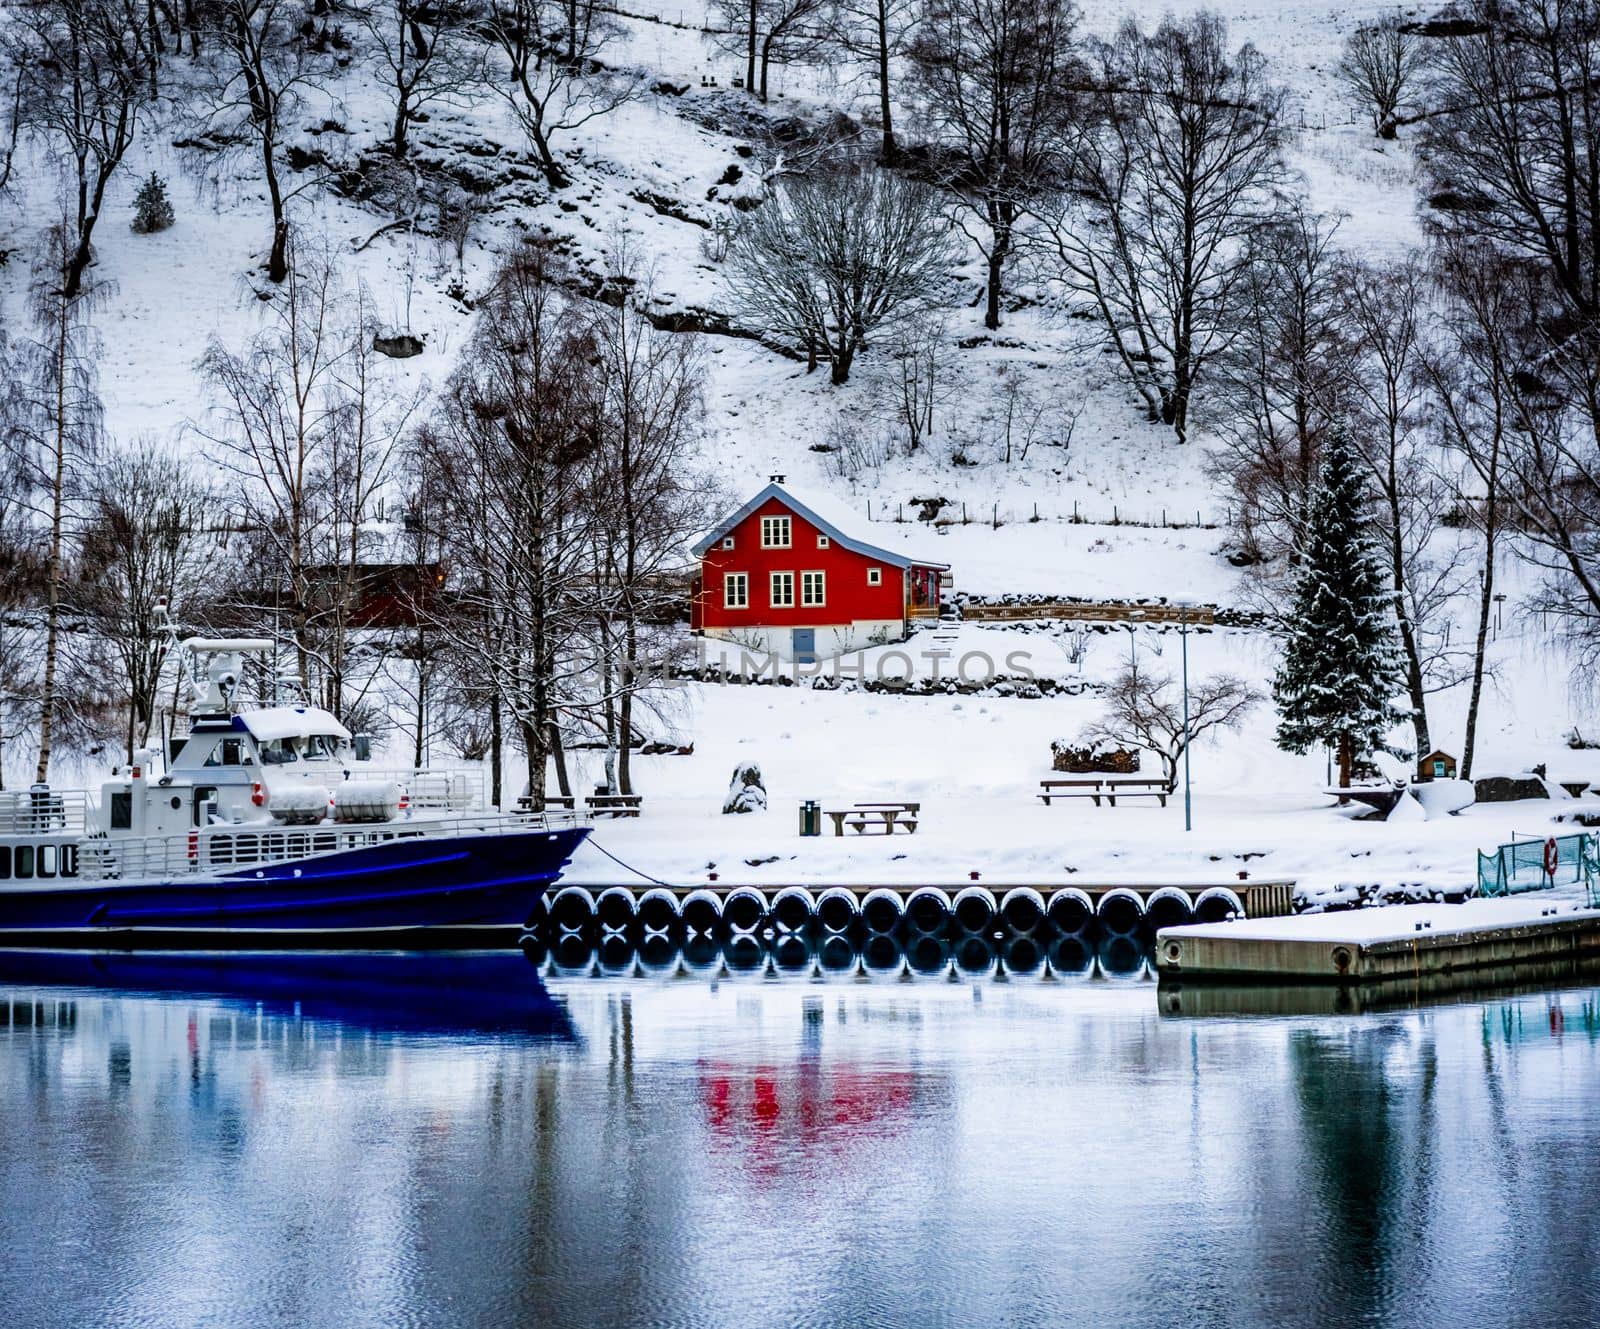 Charming village in Norway with wooden red house and boat with reflection in cold lake in winter. Scenery scandinavian landscape with sea view in Europe